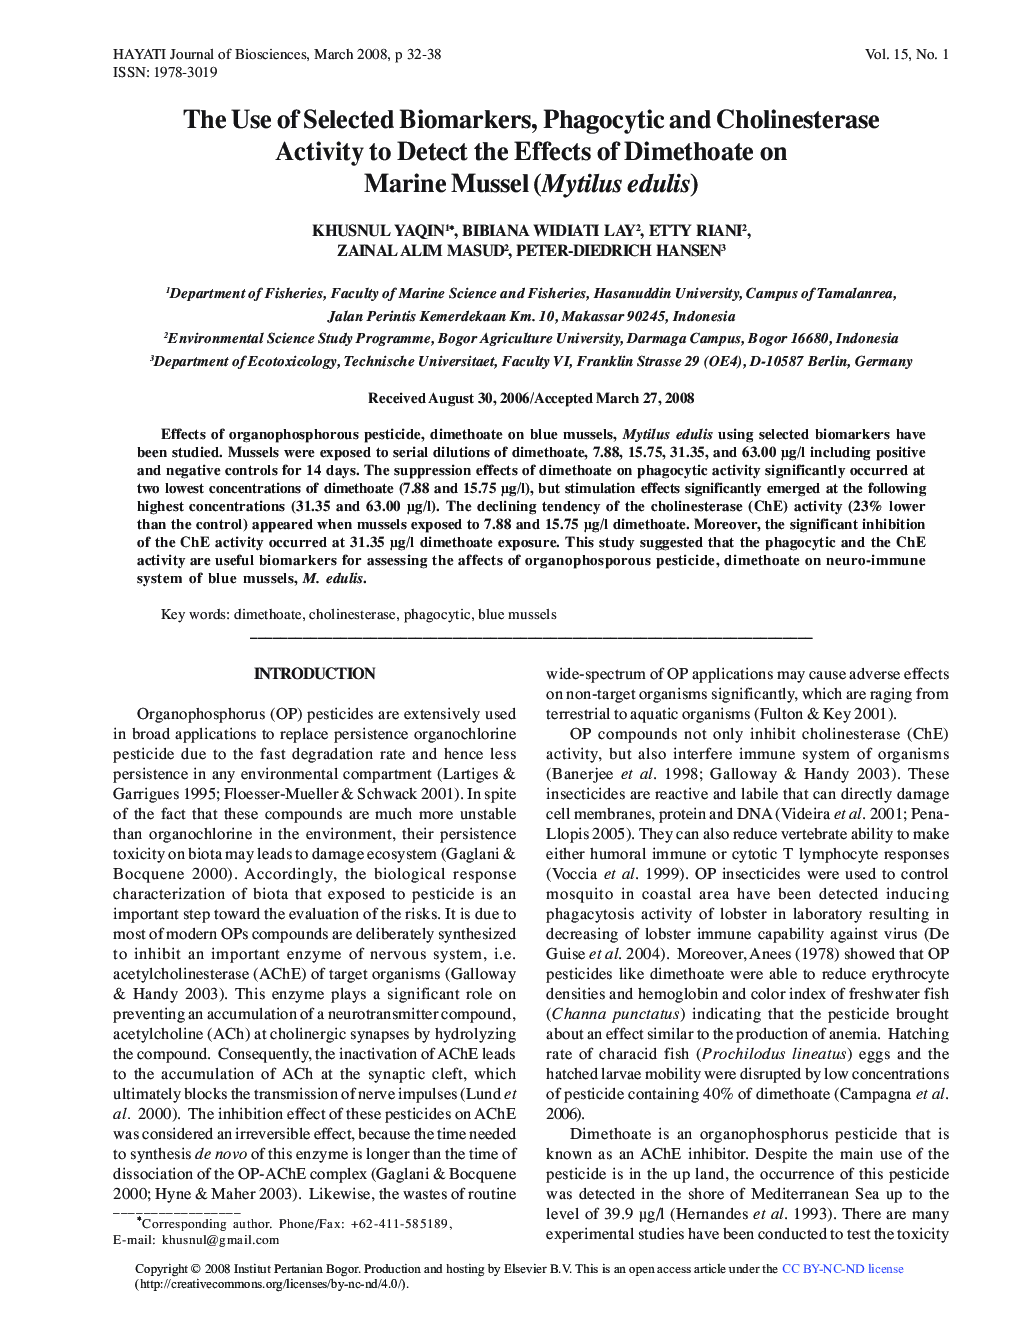 The Use of Selected Biomarkers, Phagocytic and Cholinesterase Activity to Detect the Effects of Dimethoate on Marine Mussel (Mytilus edulis)